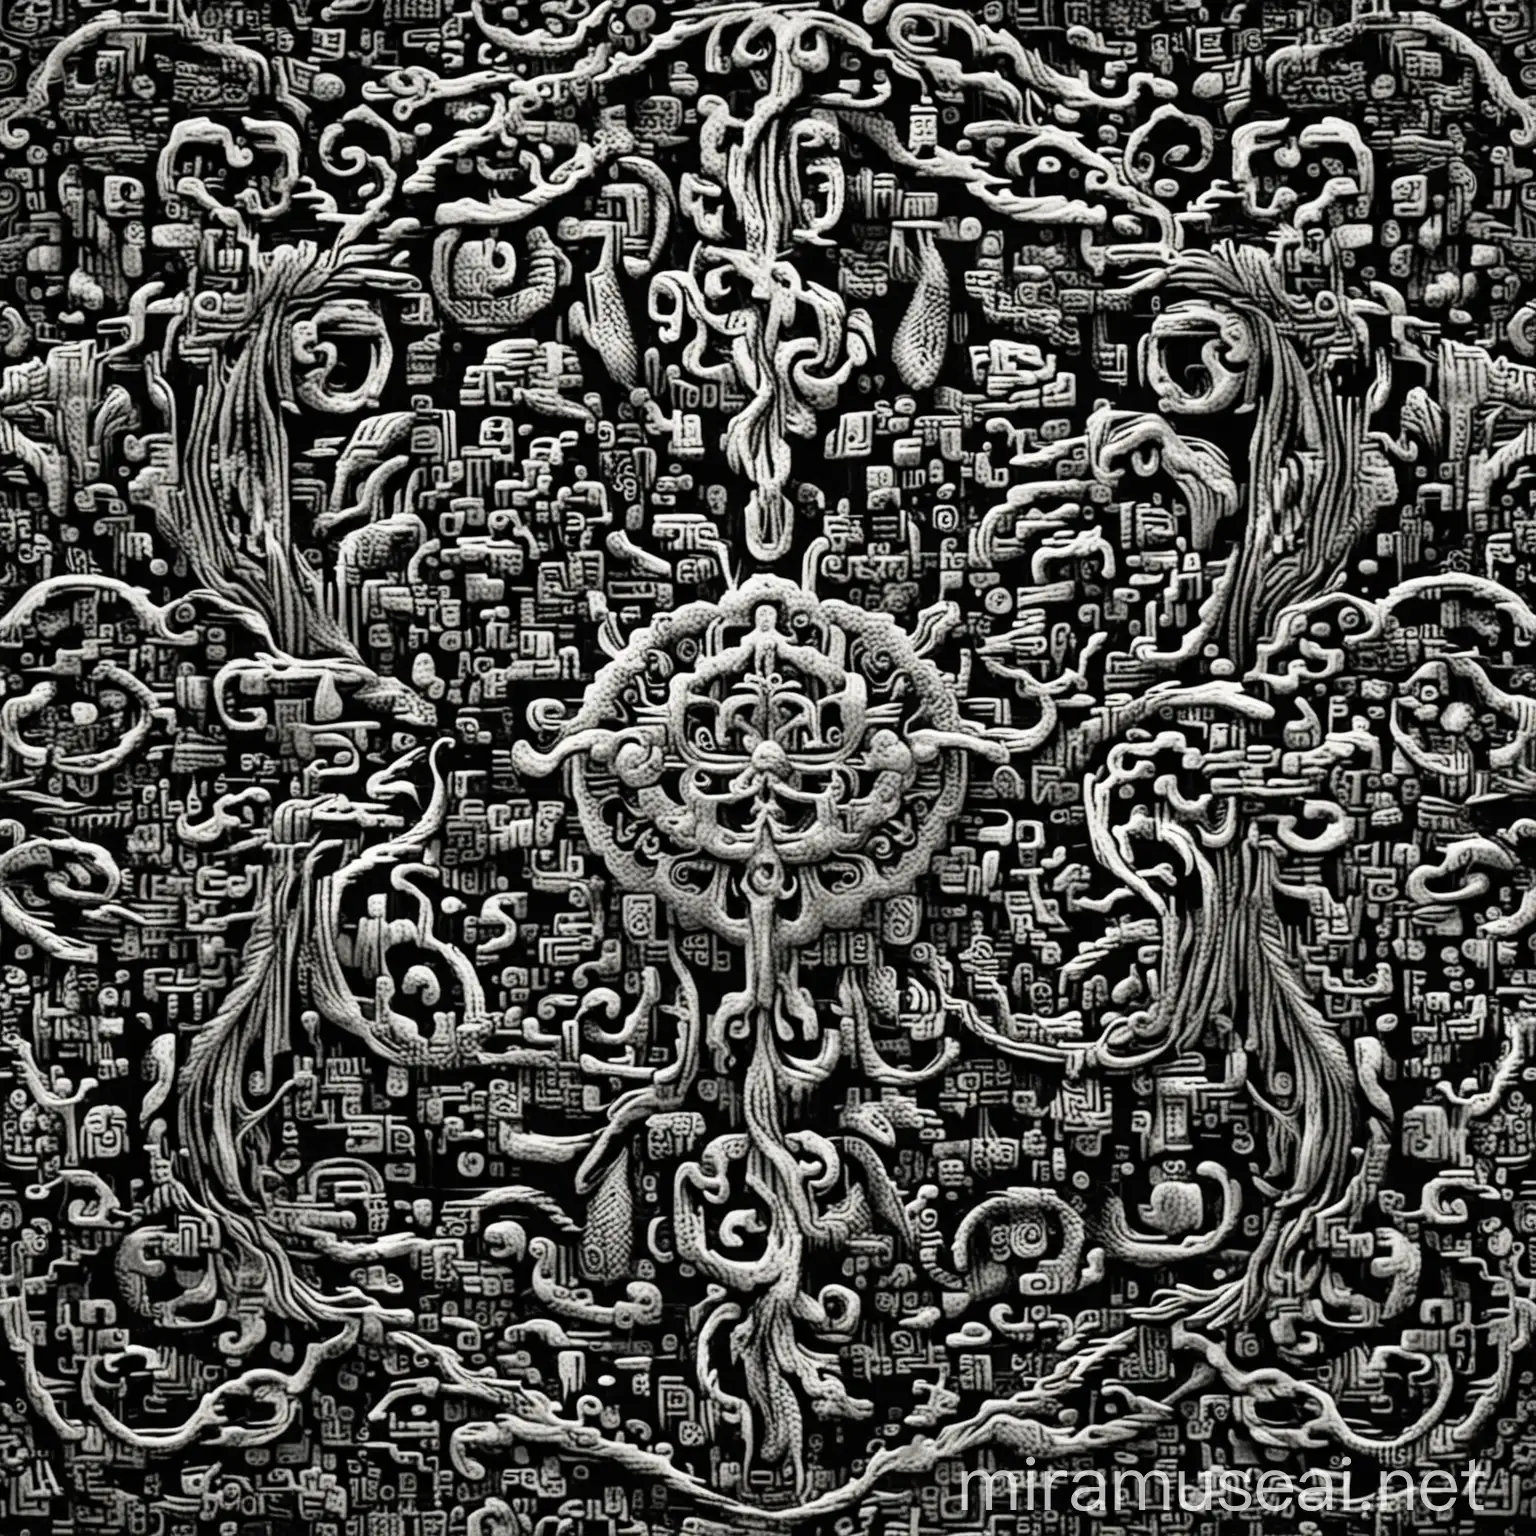 Traditional Mongolian Pattern in Monochrome Abstract Artistic Design